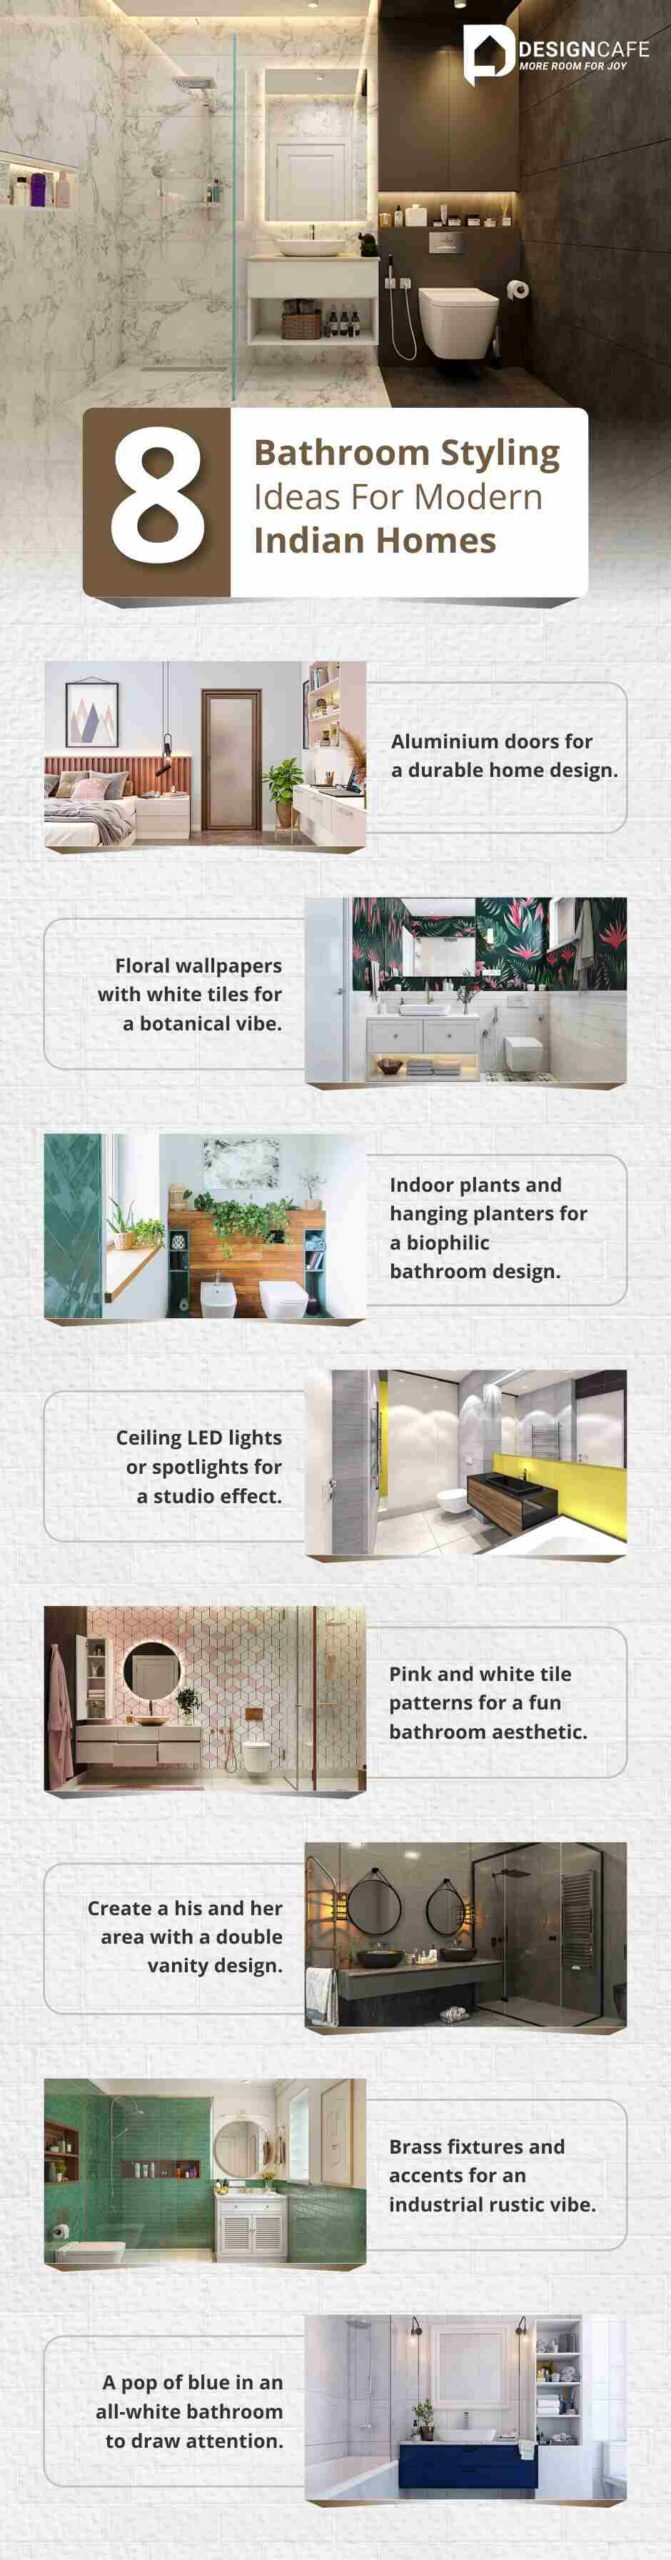 8 bathroom styling indian home infographic